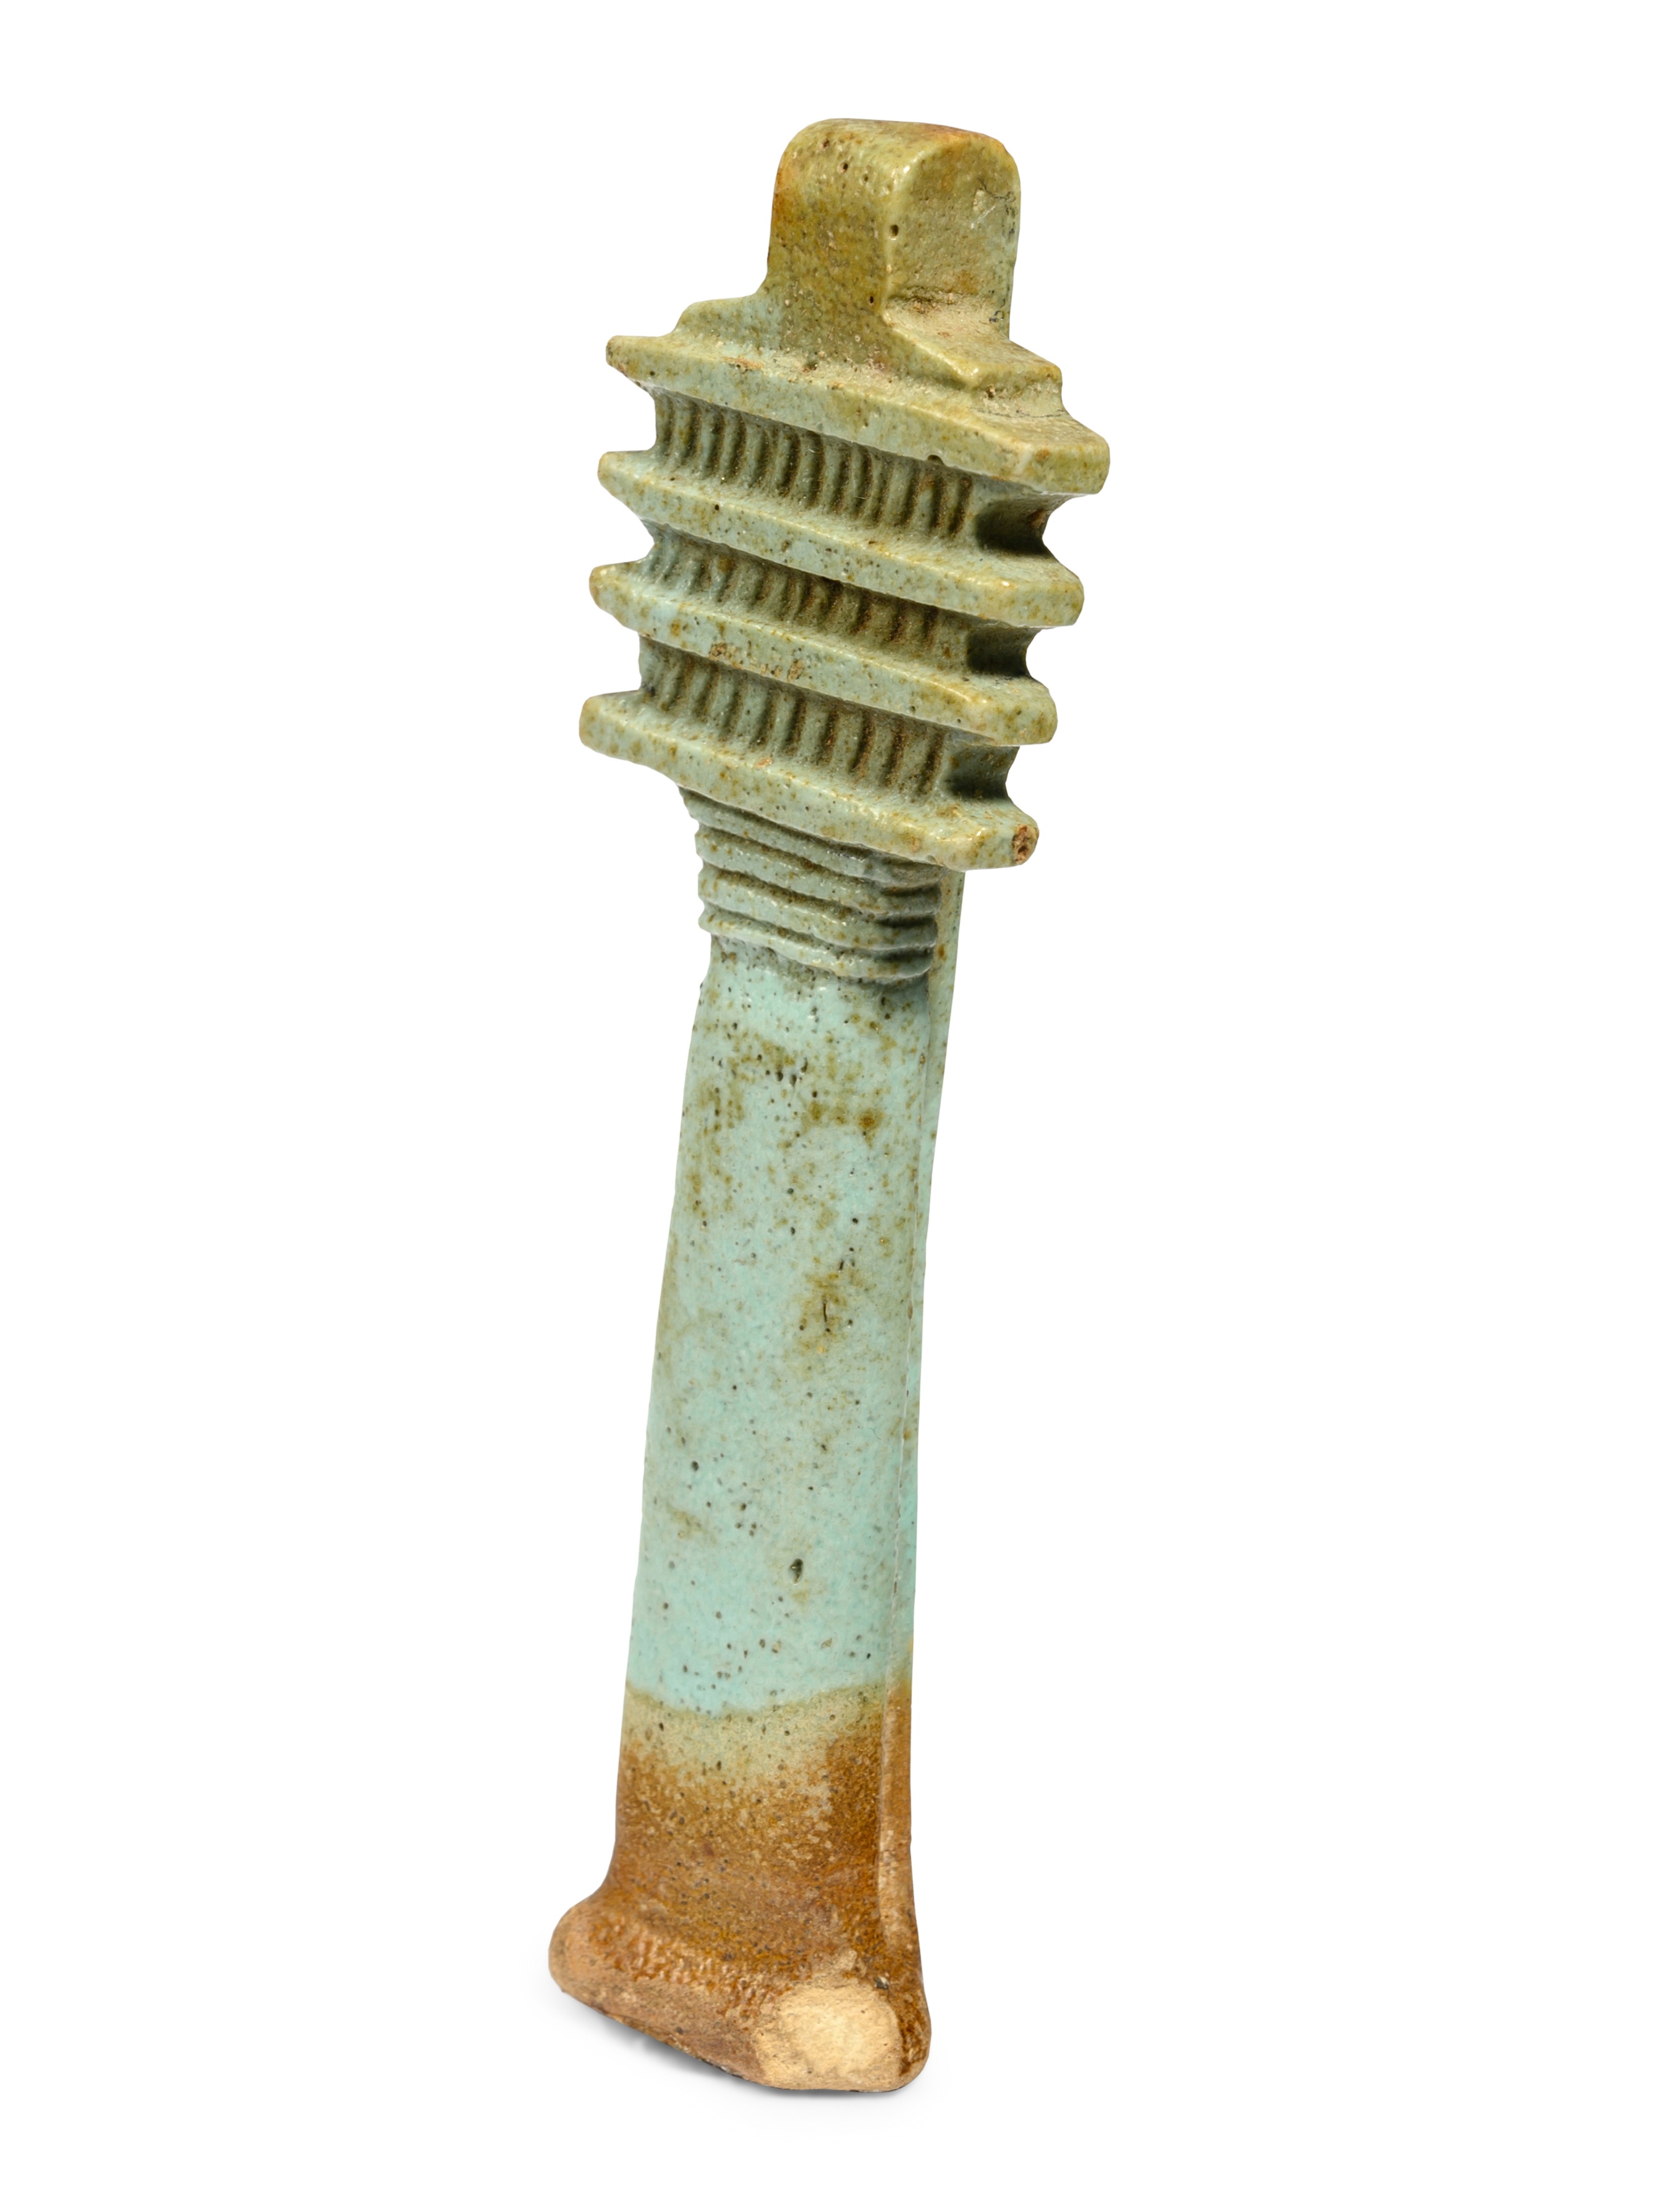 An Egyptian Faience Djed Pillar Height 3 3/4 inches (9.4 cm). - Image 2 of 4